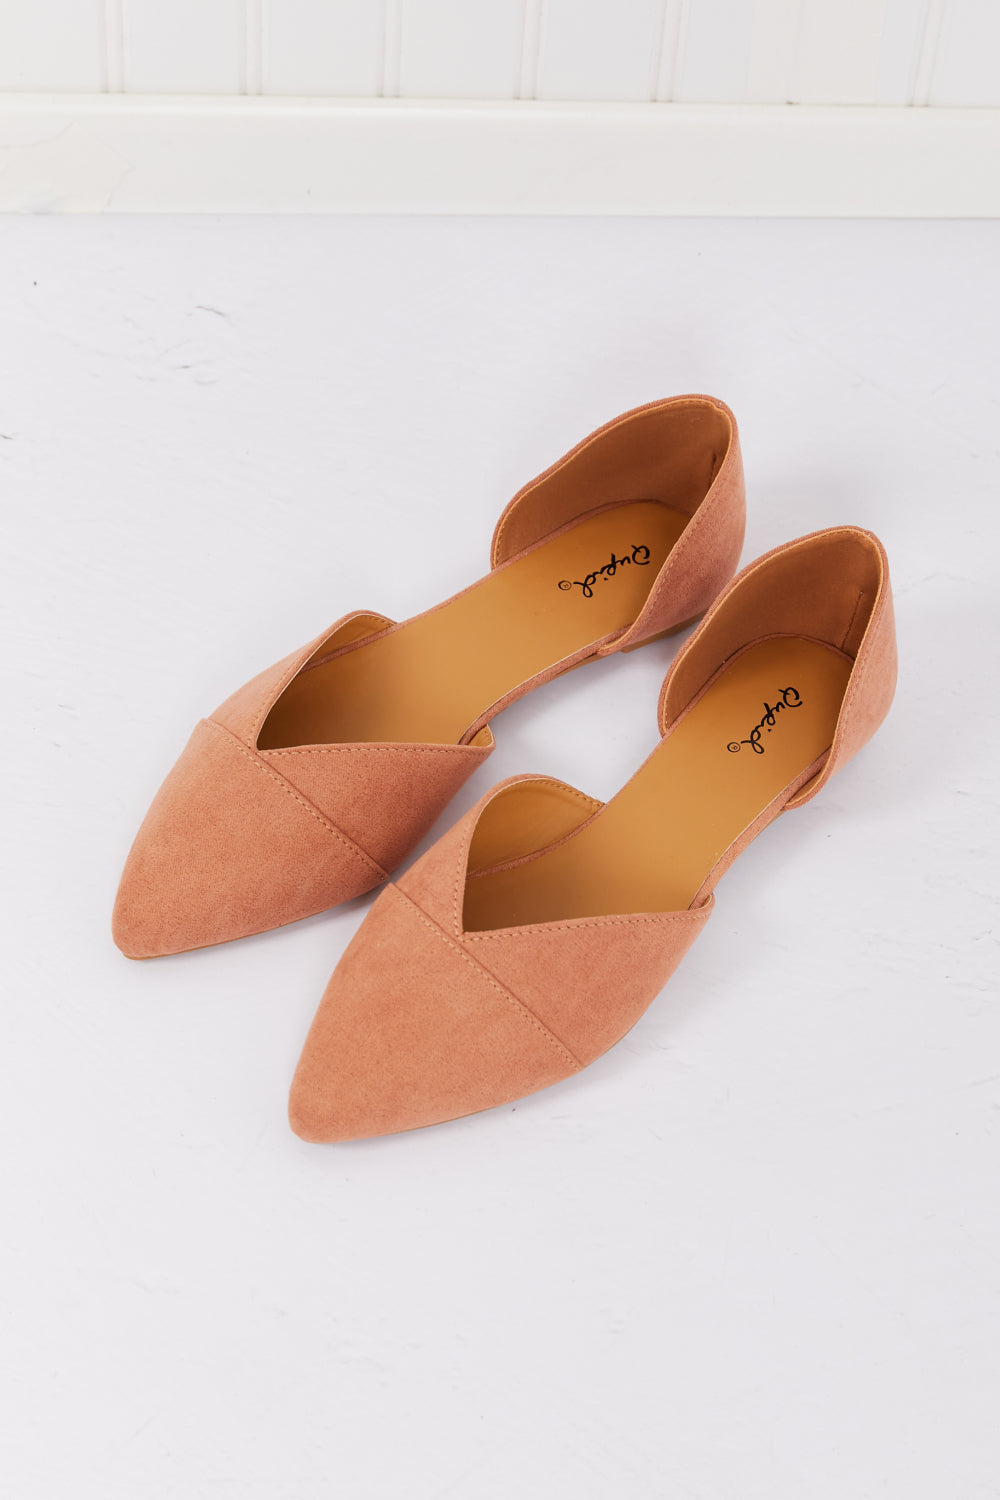 Claire Qupid Simple and Chic Pointed Toe Ballet Flats in Sunkiss- 2 size 8 left! FINAL SALE!